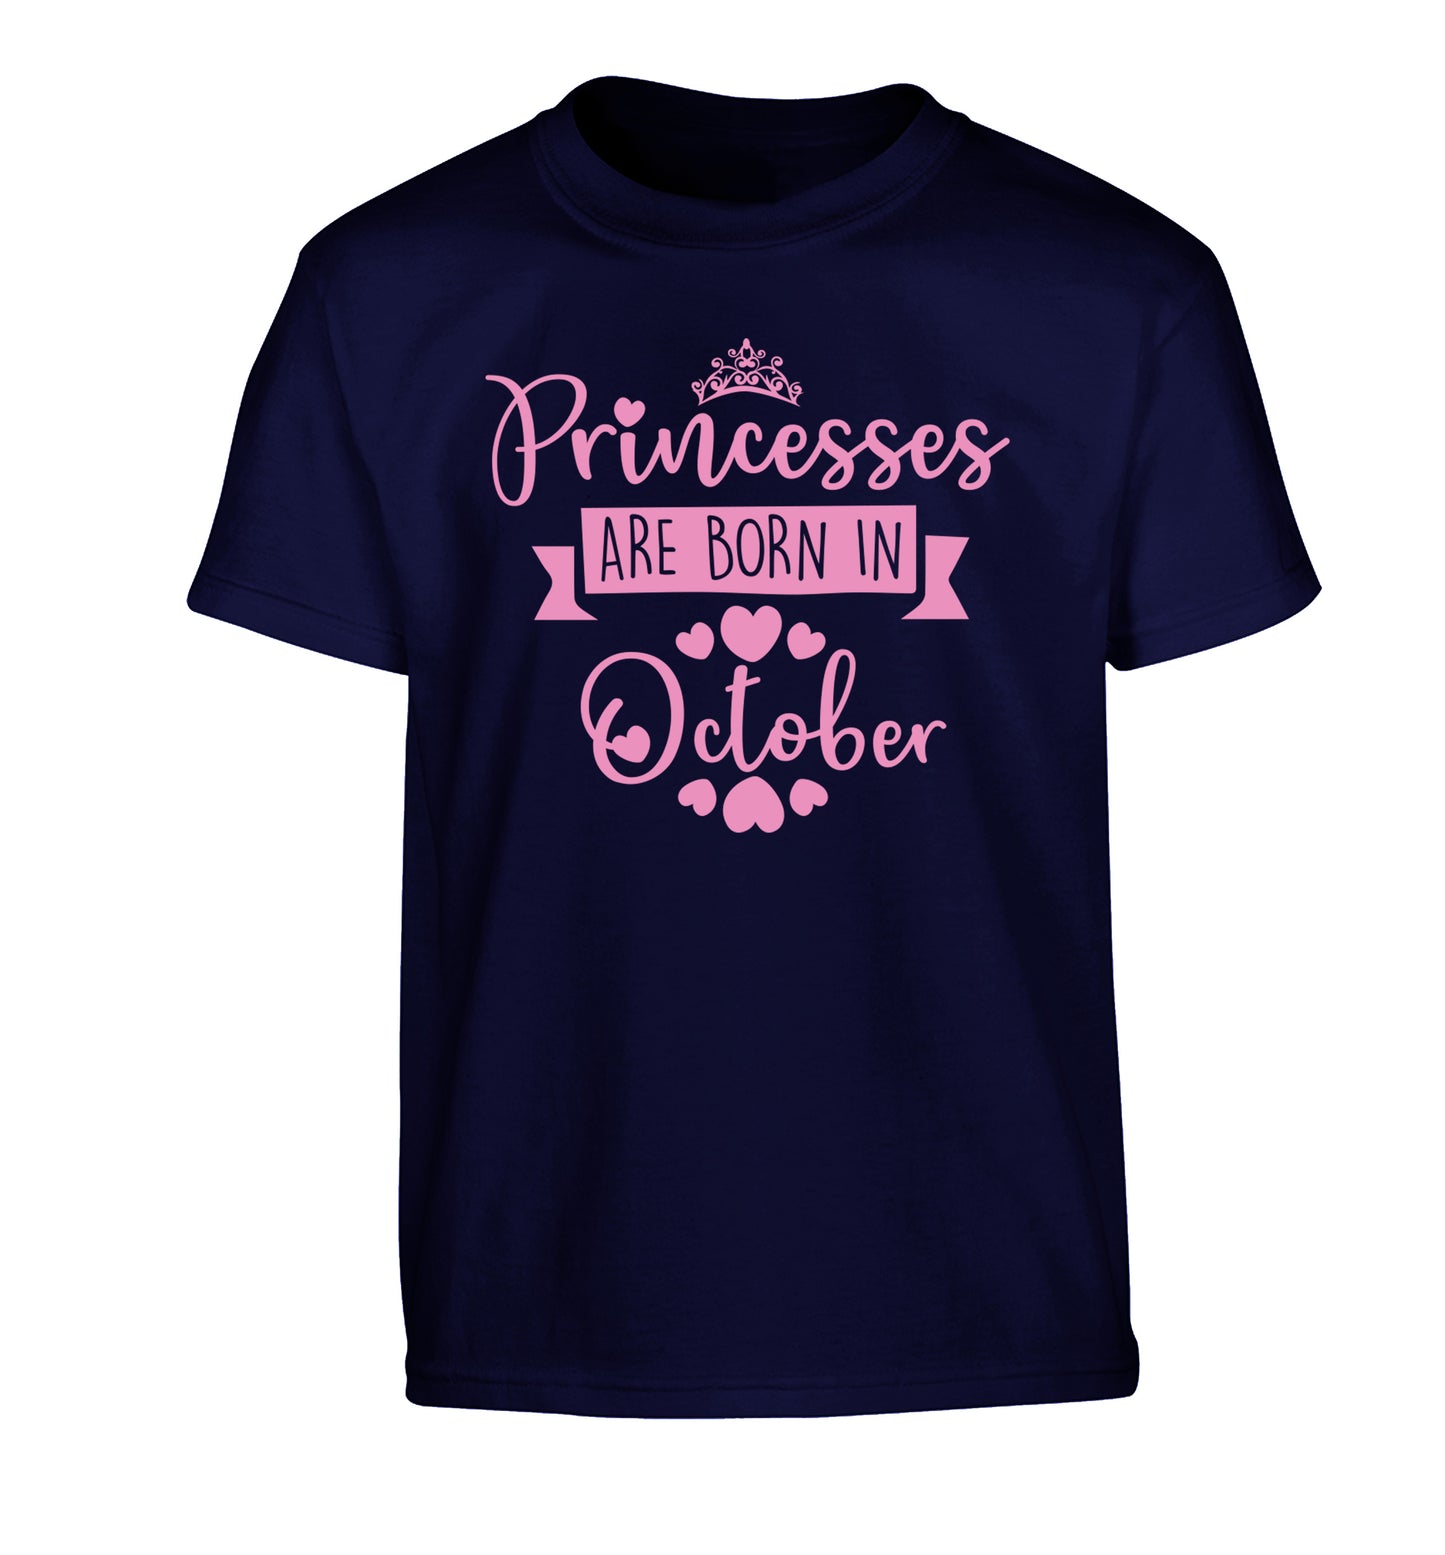 Princesses are born in October Children's navy Tshirt 12-13 Years